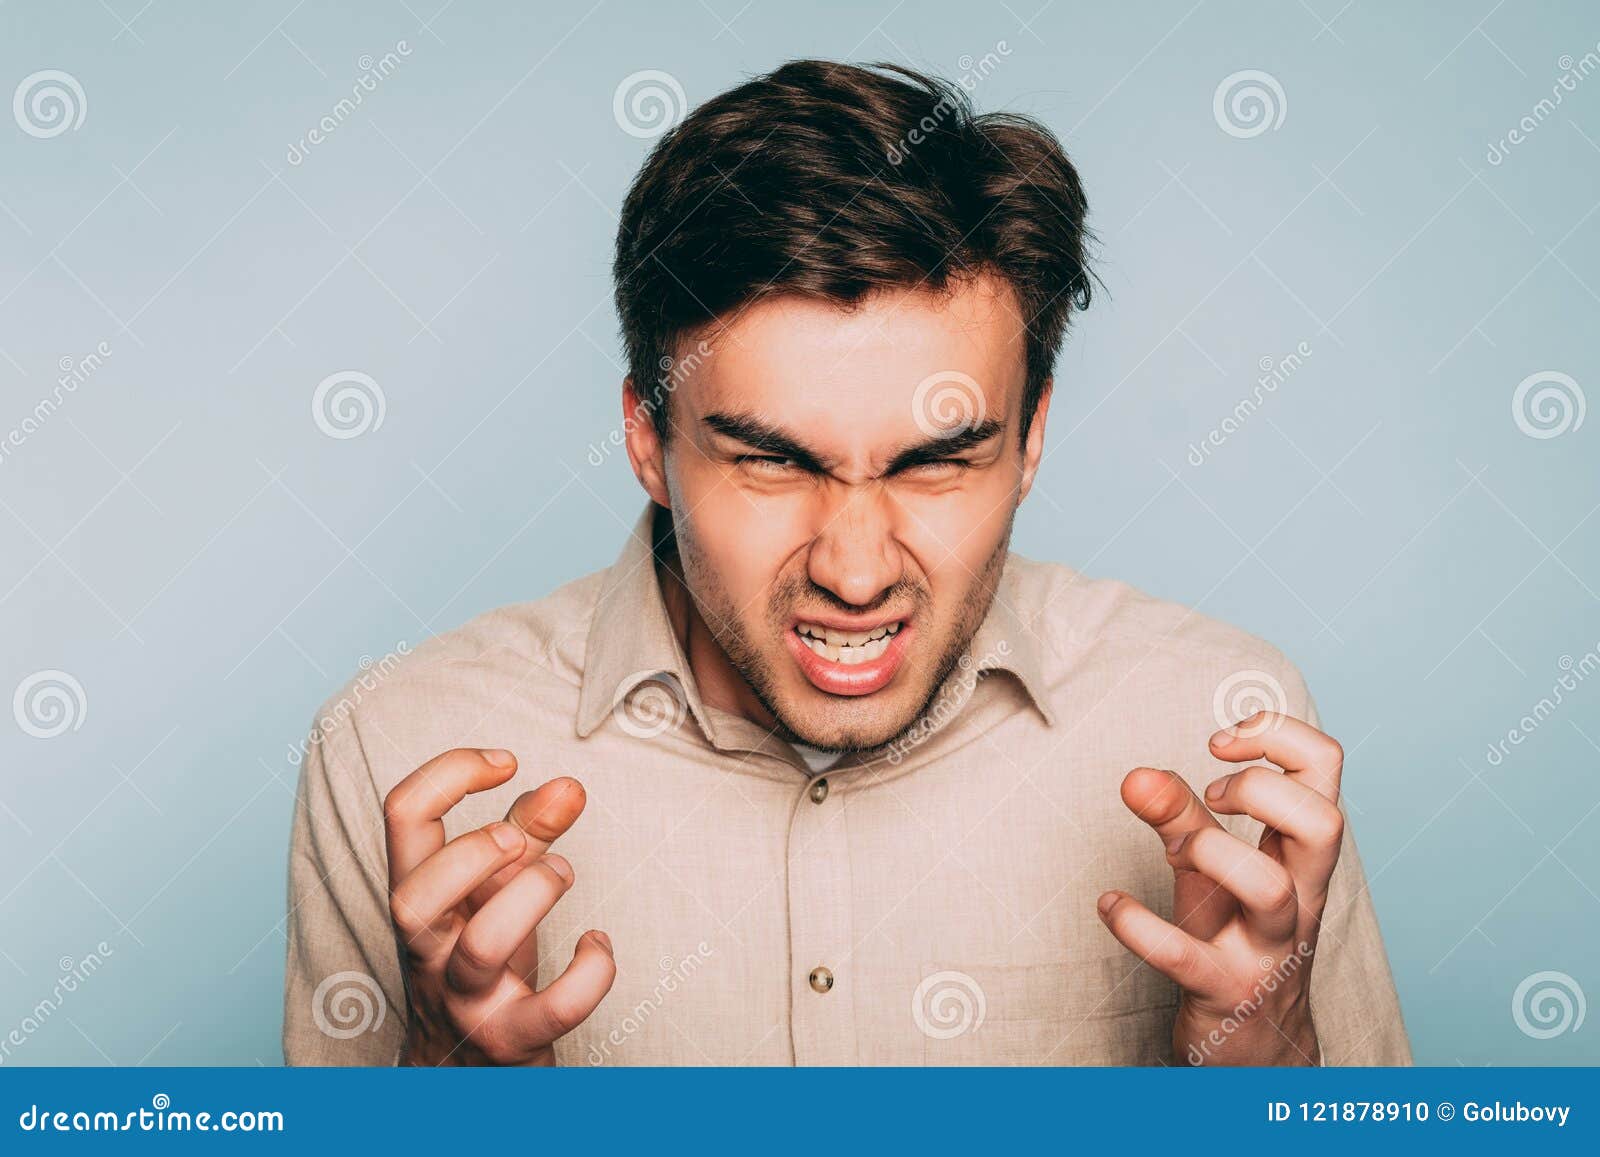 hate kill anger man distorted facial expression